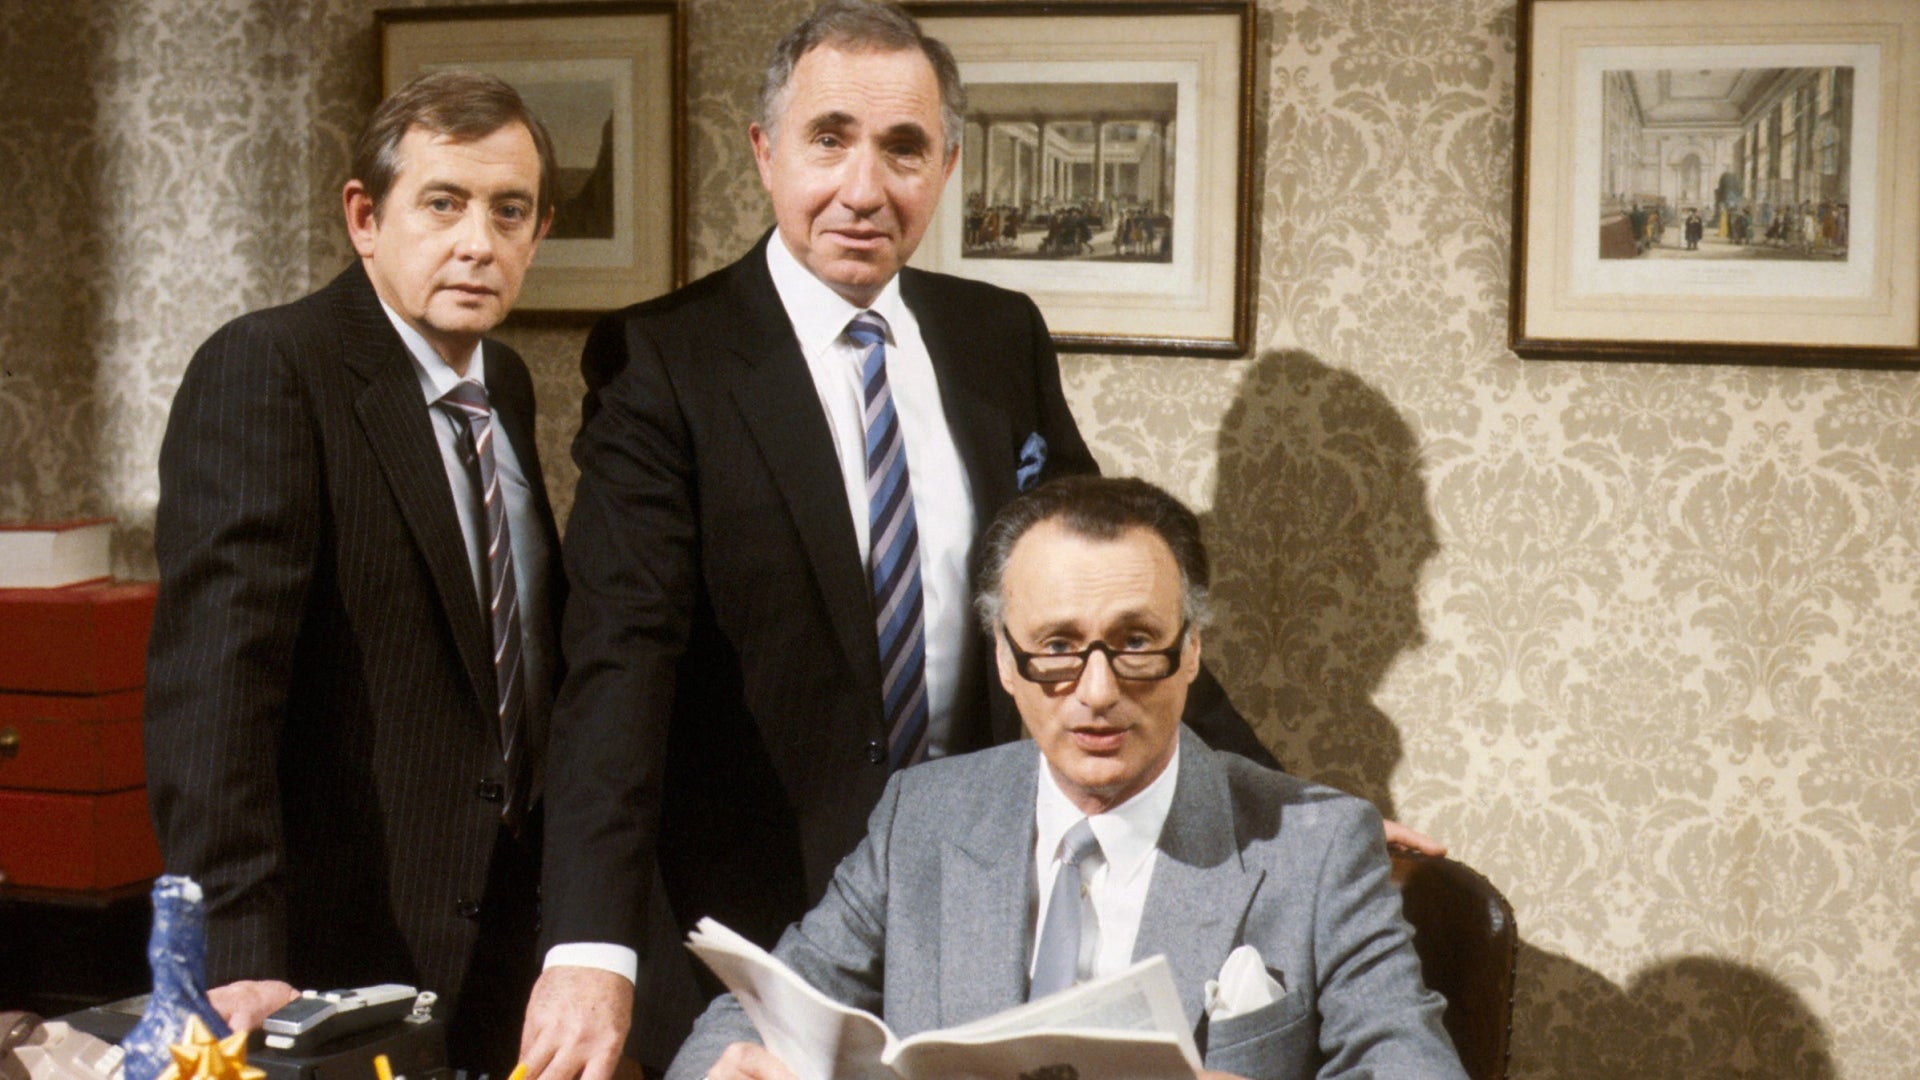 Yes, Minister: The Complete Collection - Seasons 1-3